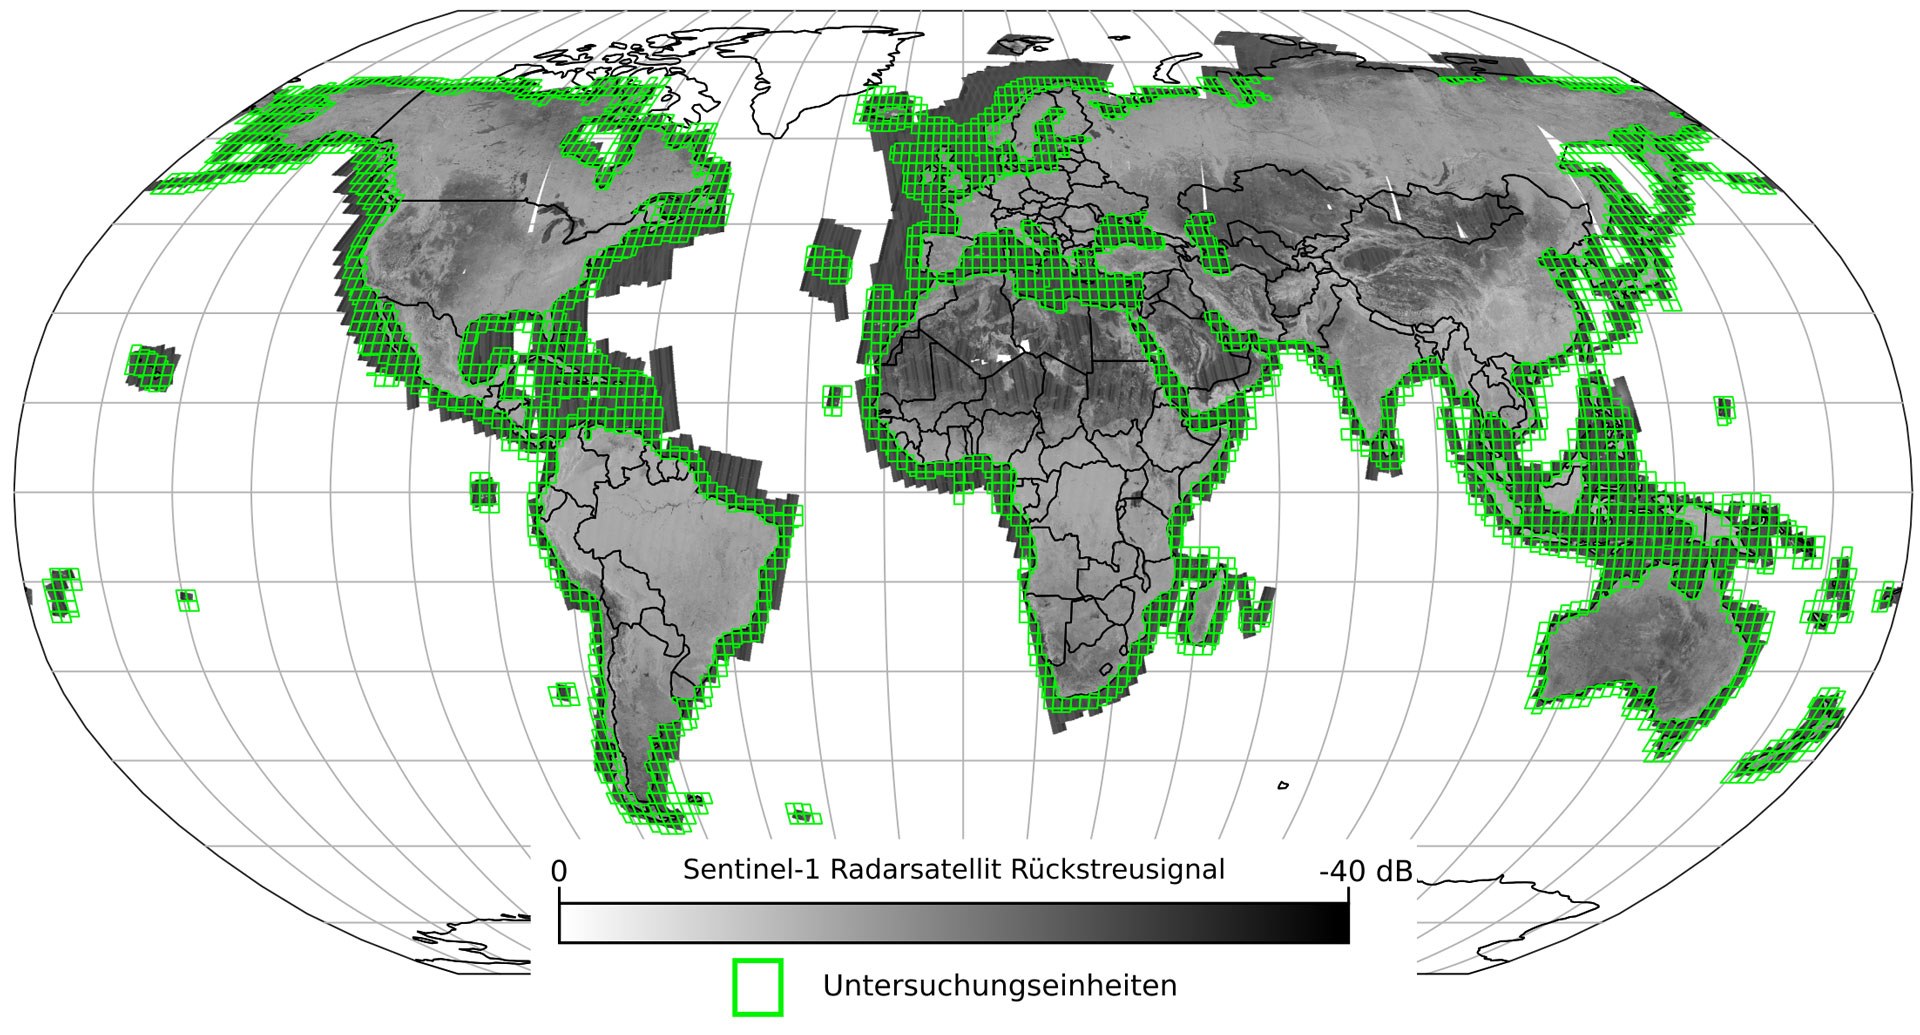 Global coverage of the Sentinel-1 radar mission and the offshore areas that were investigated